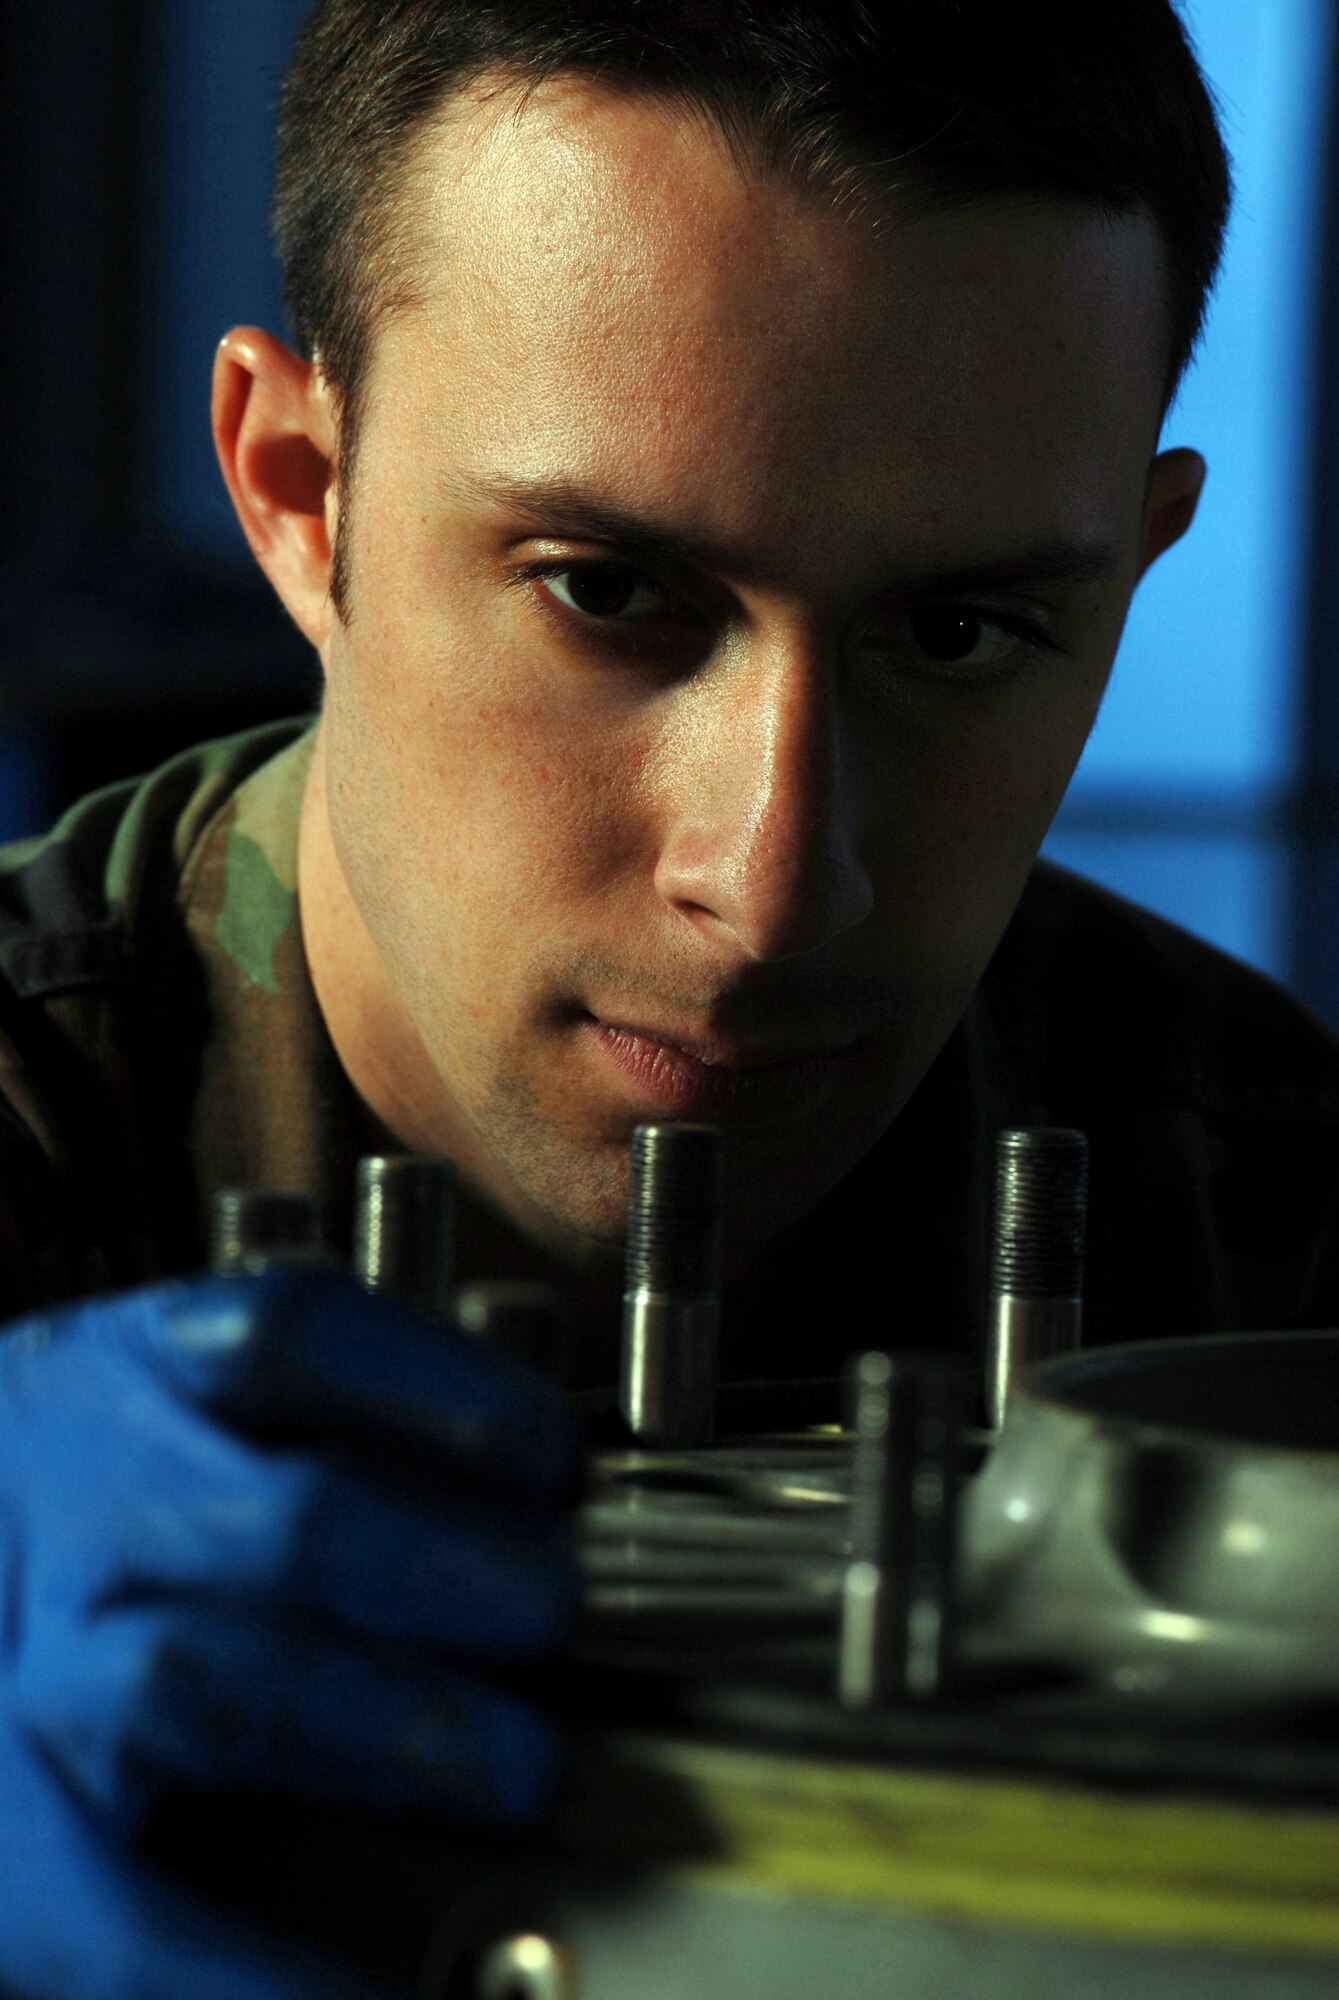 Staff Sgt. Greg Thompson, an aircraft mechanic from the Aero Repair Shop, visually inspect the bolts on a C-17 Globemasterr III cargo aircraft wheel at March Air Reserve Base, Calif., on Feb. 3, 2008. (U.S. Air Force photo by Val Gempis)